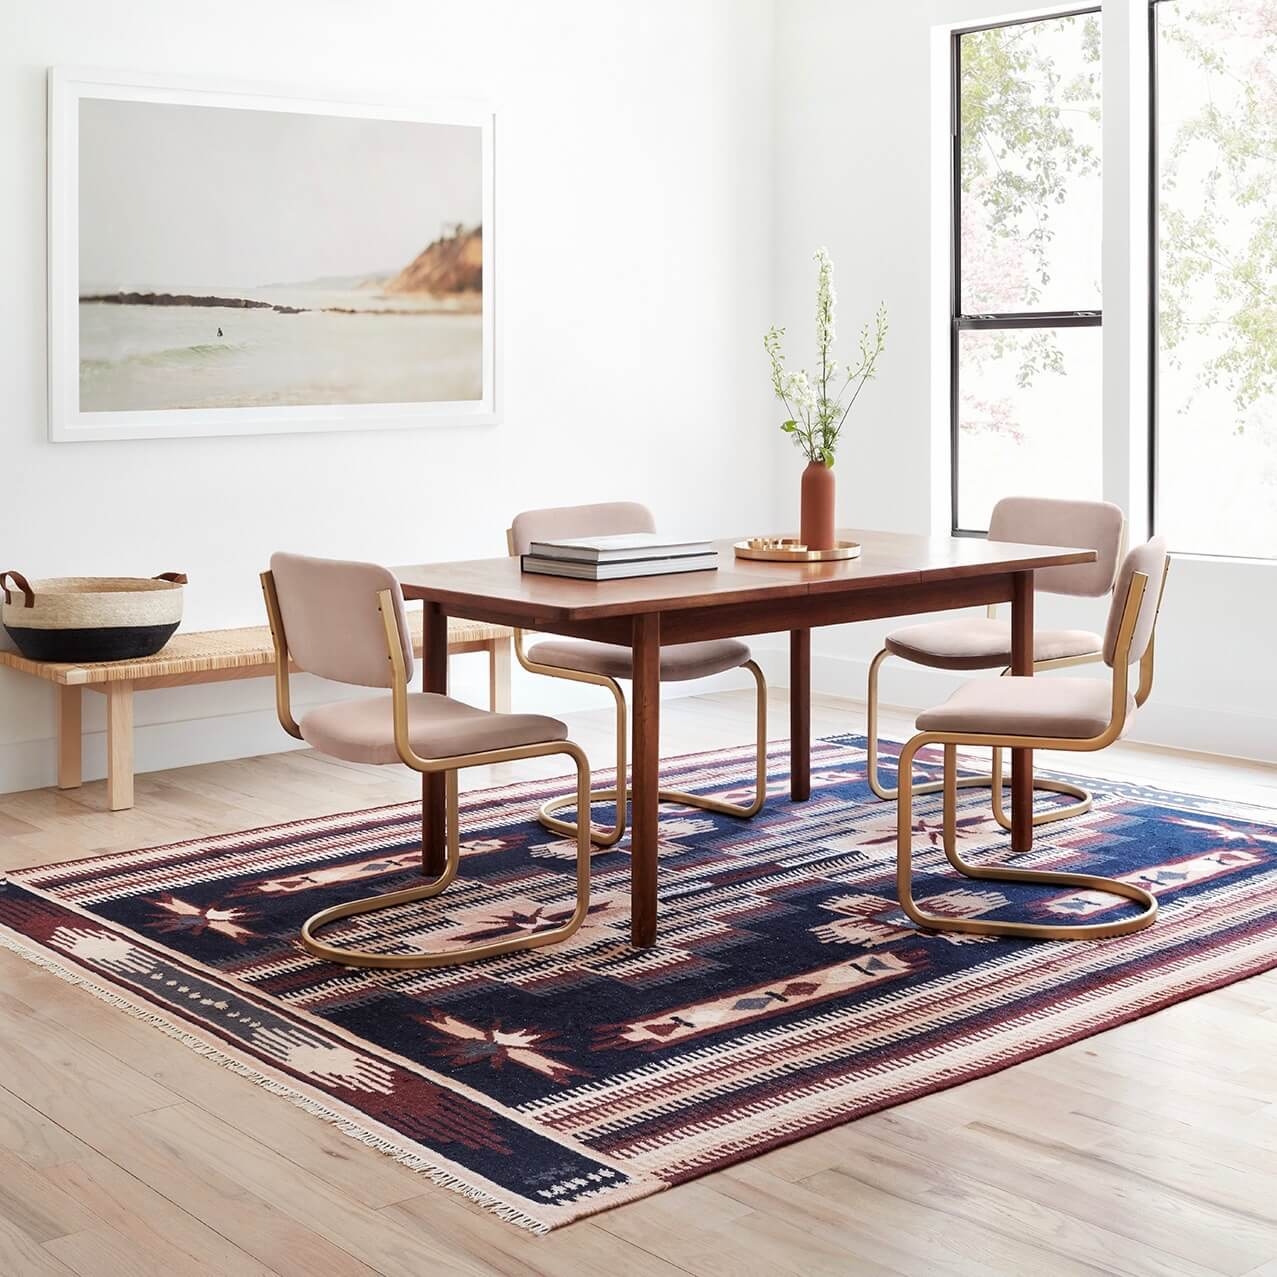 The Citizenry Keya Handwoven Area Rug | 8' x 10' | Made You Blush - Image 1